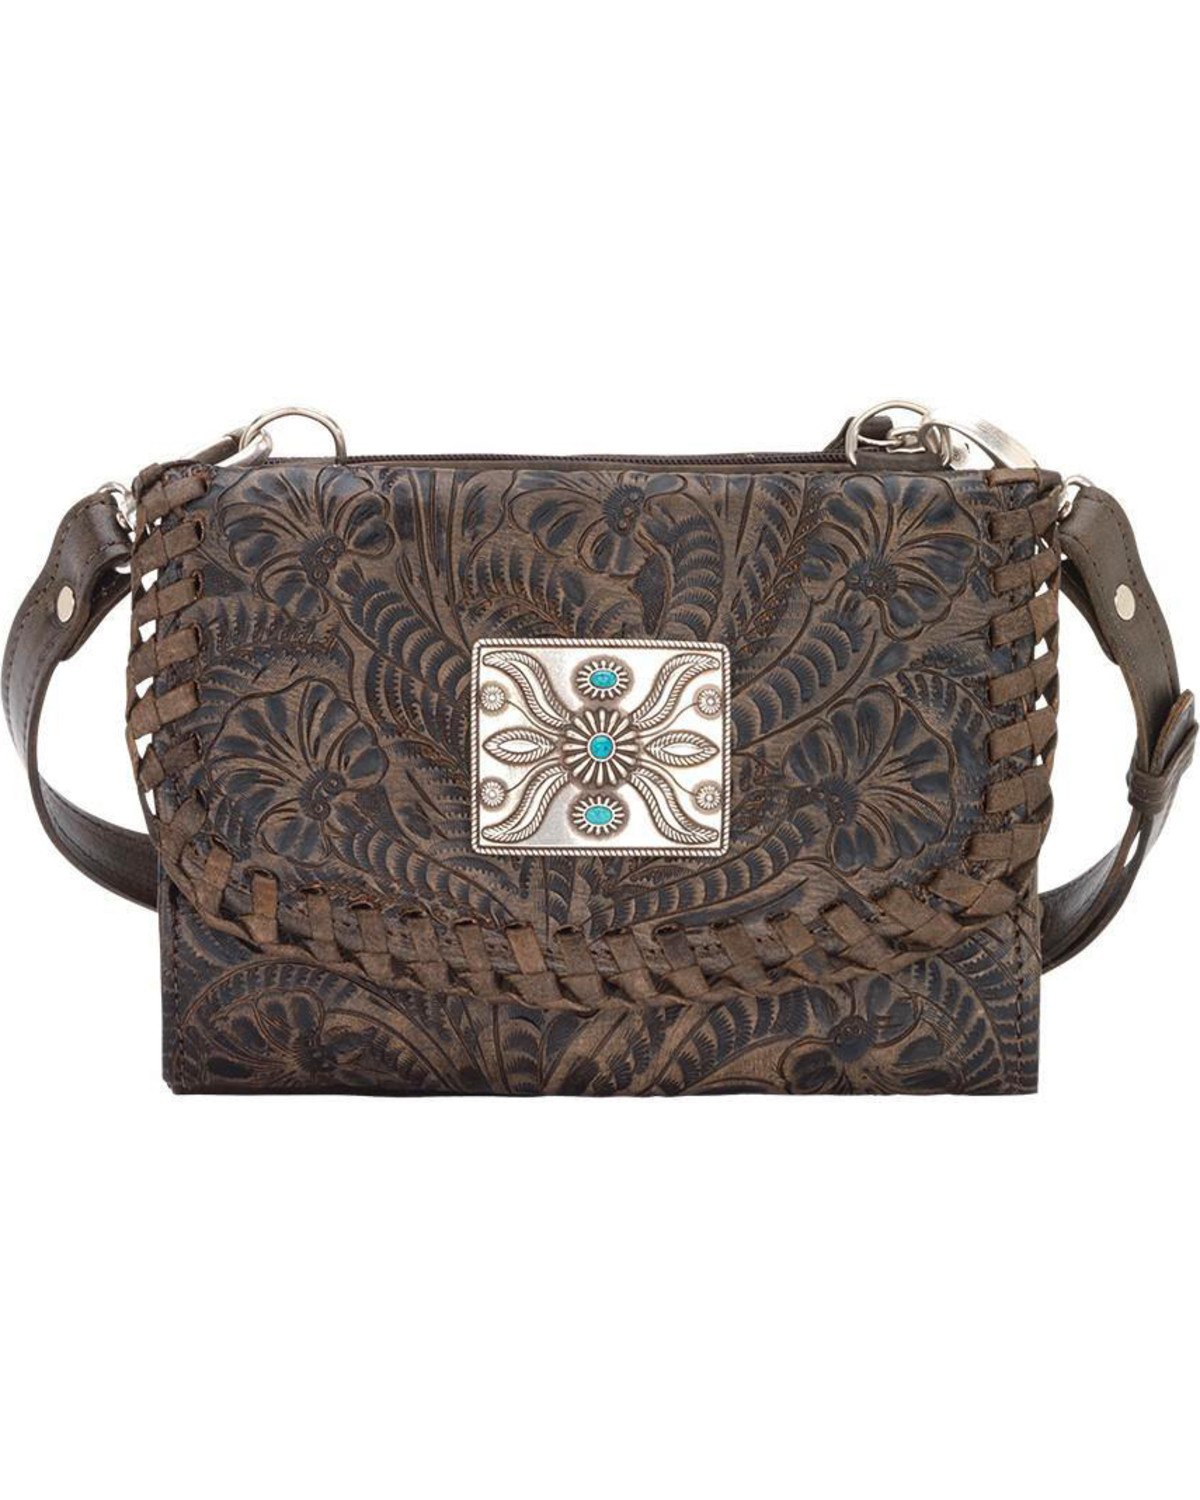 American West Women's Two Step Small Crossbody Bag